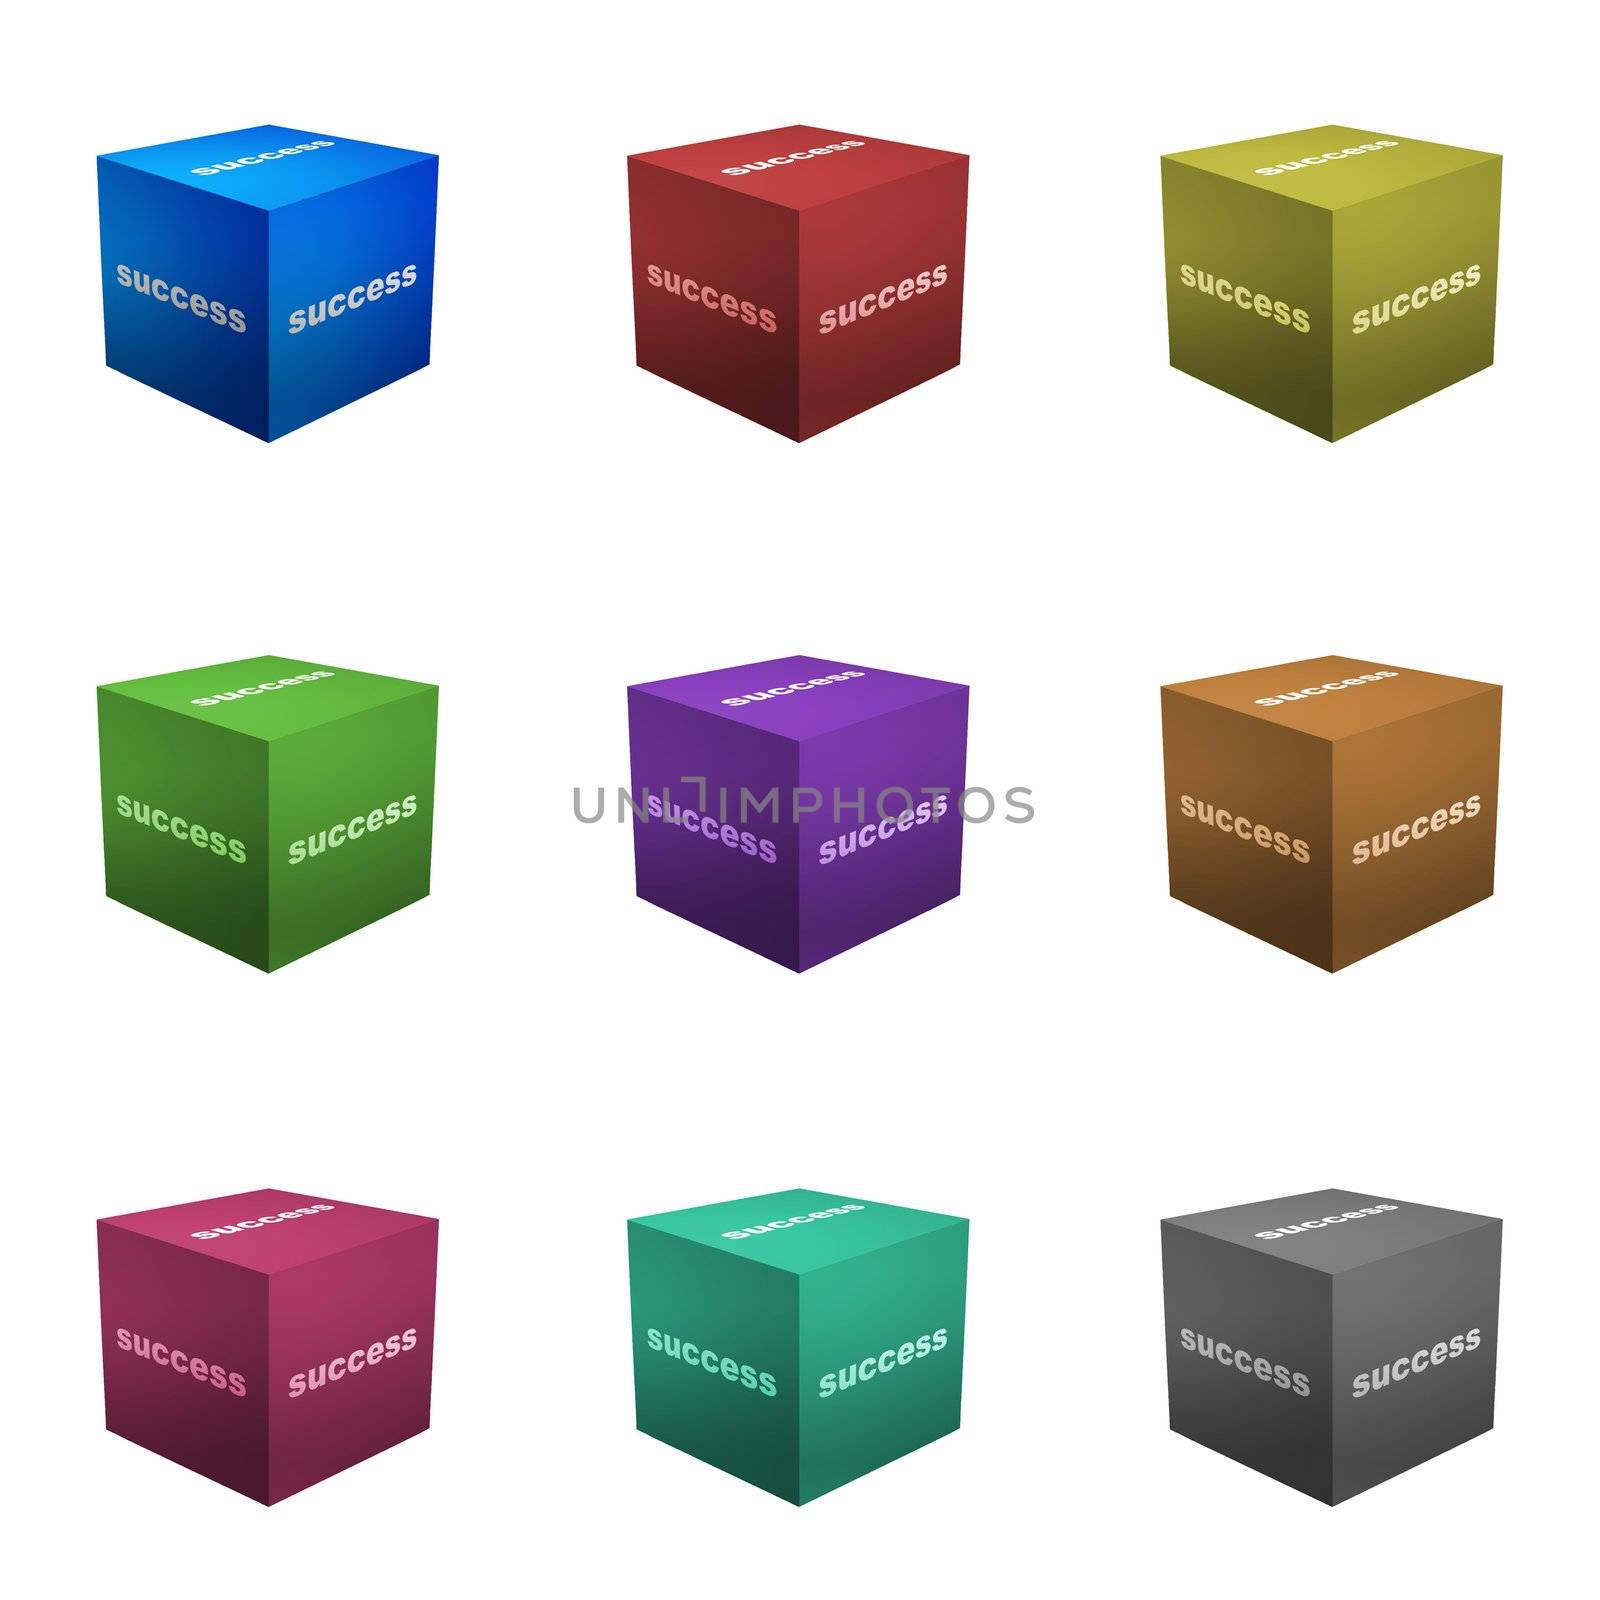 Success Boxes in 3d Cube Format by kentoh